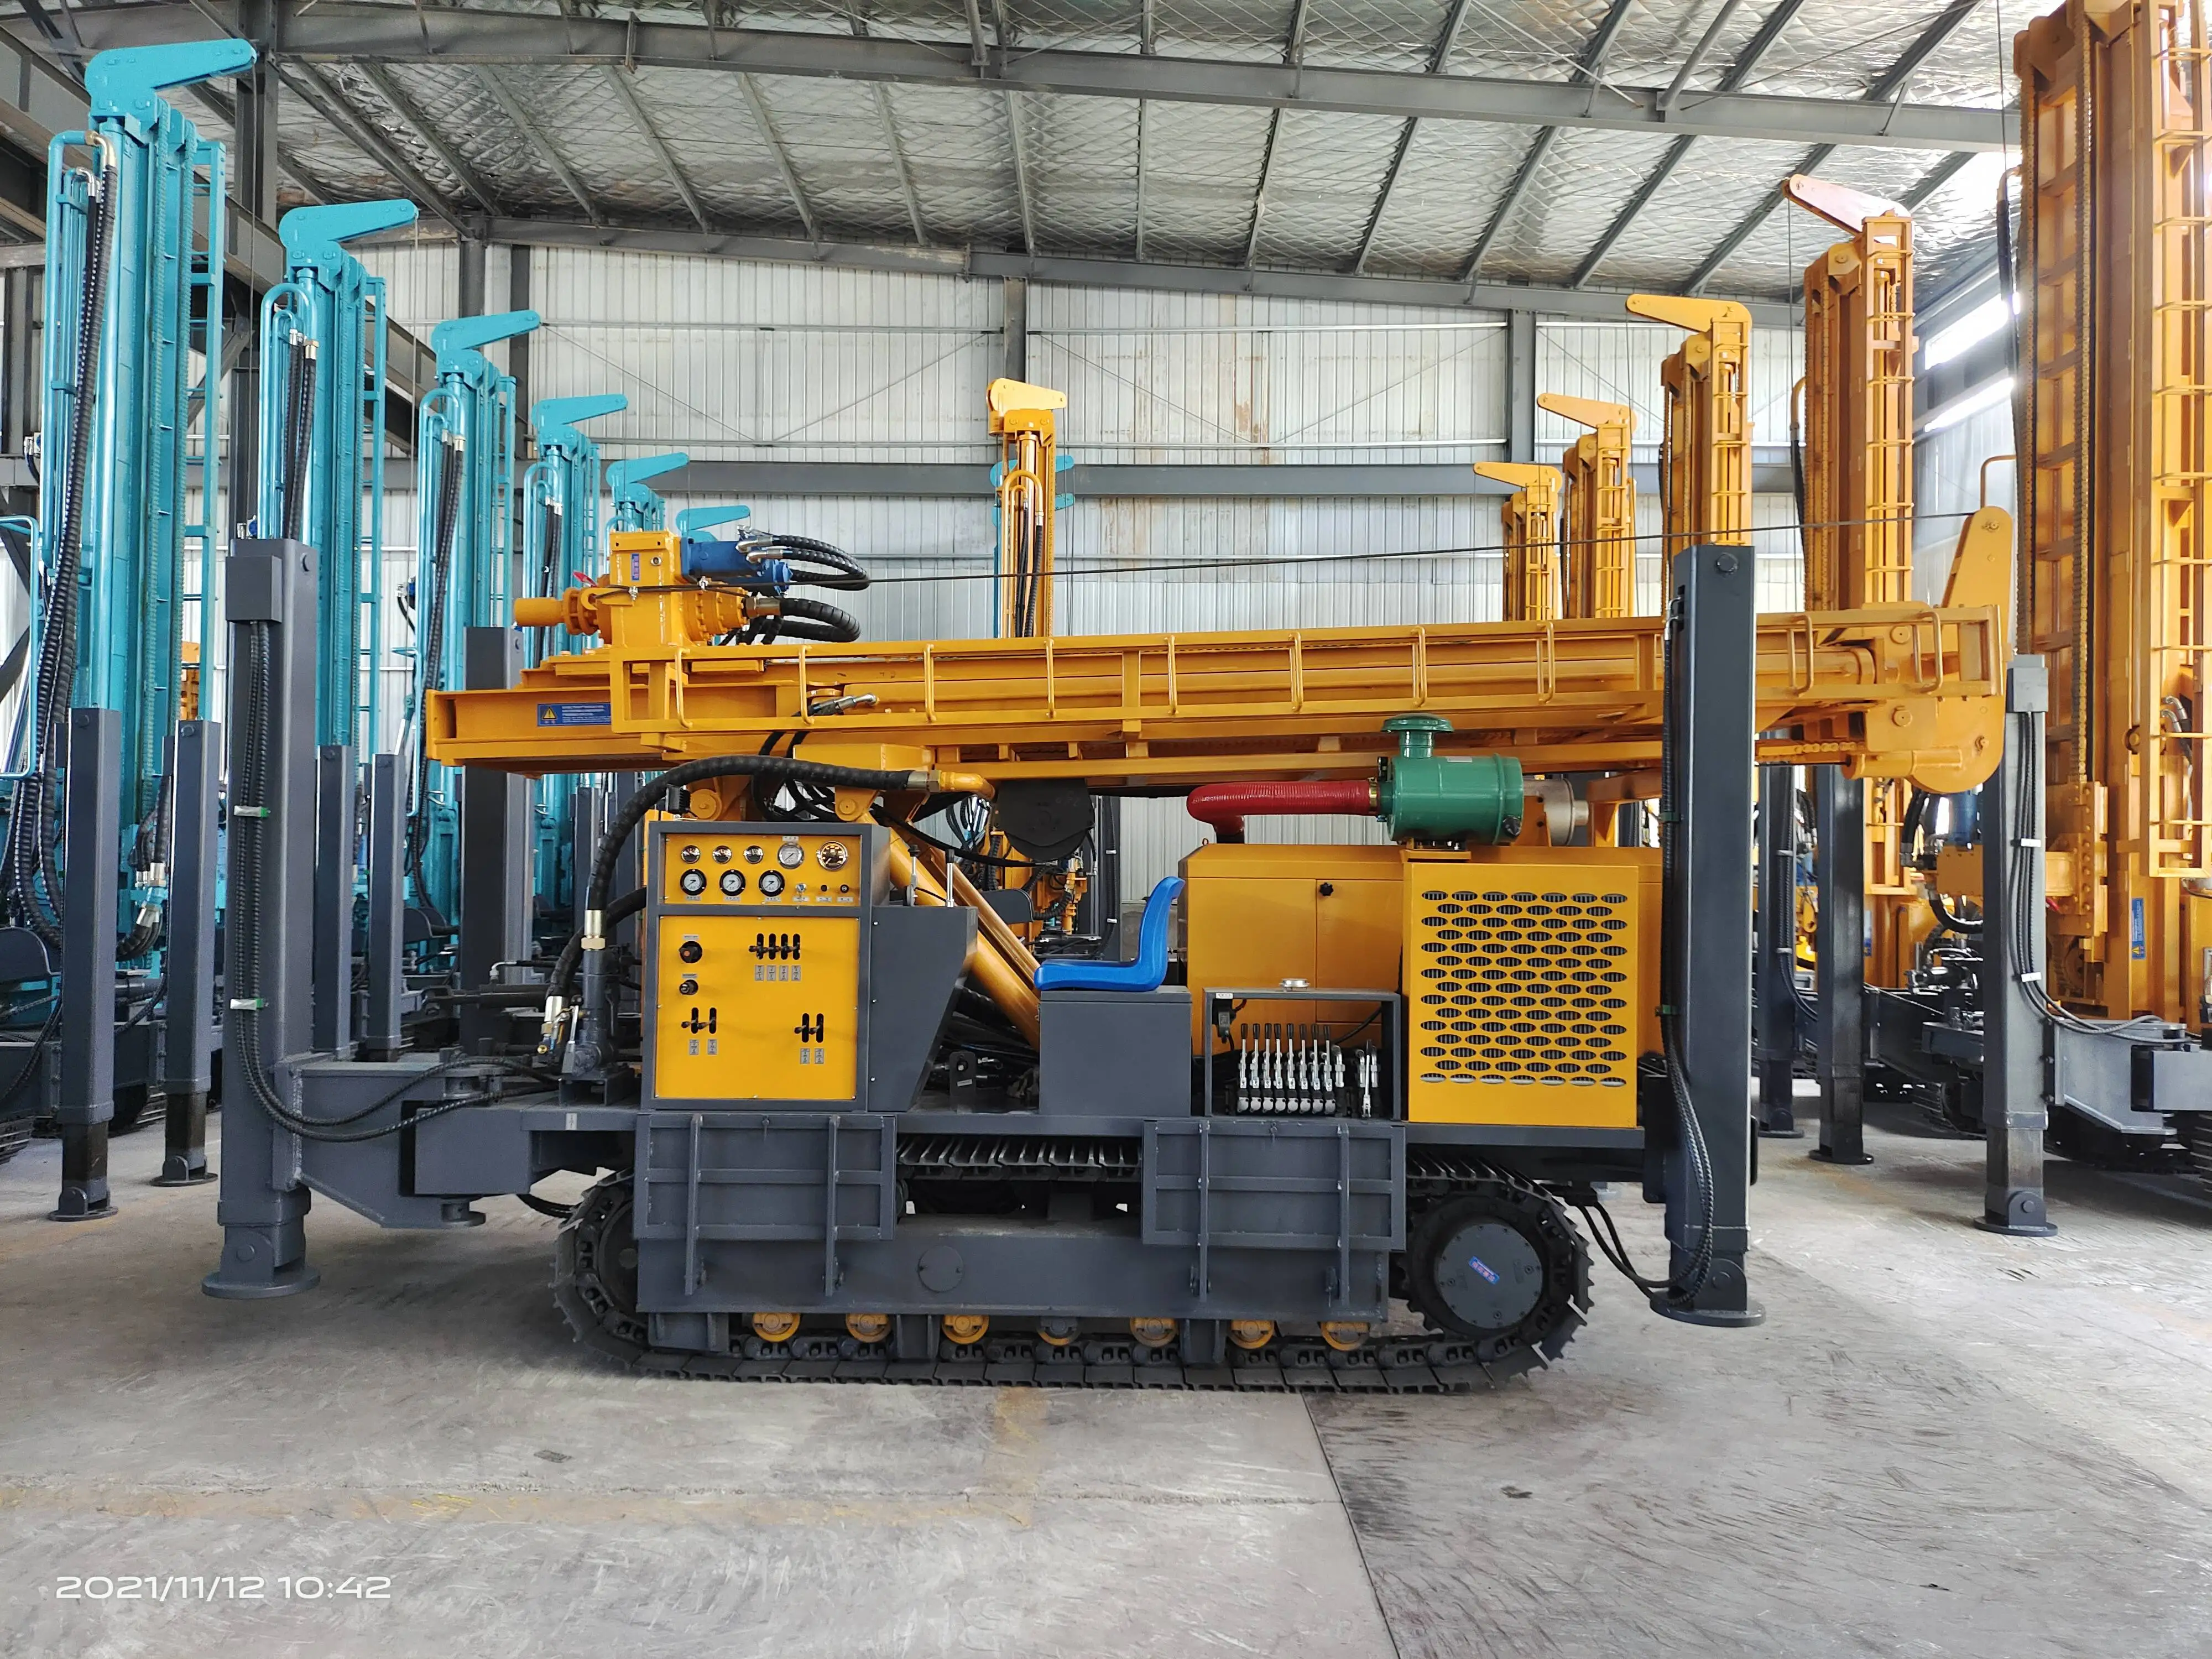 Hongwuhuan HWH600 Crawler hydraulic water well drilling rig 600m depth rotary bore hole water well drilling rig